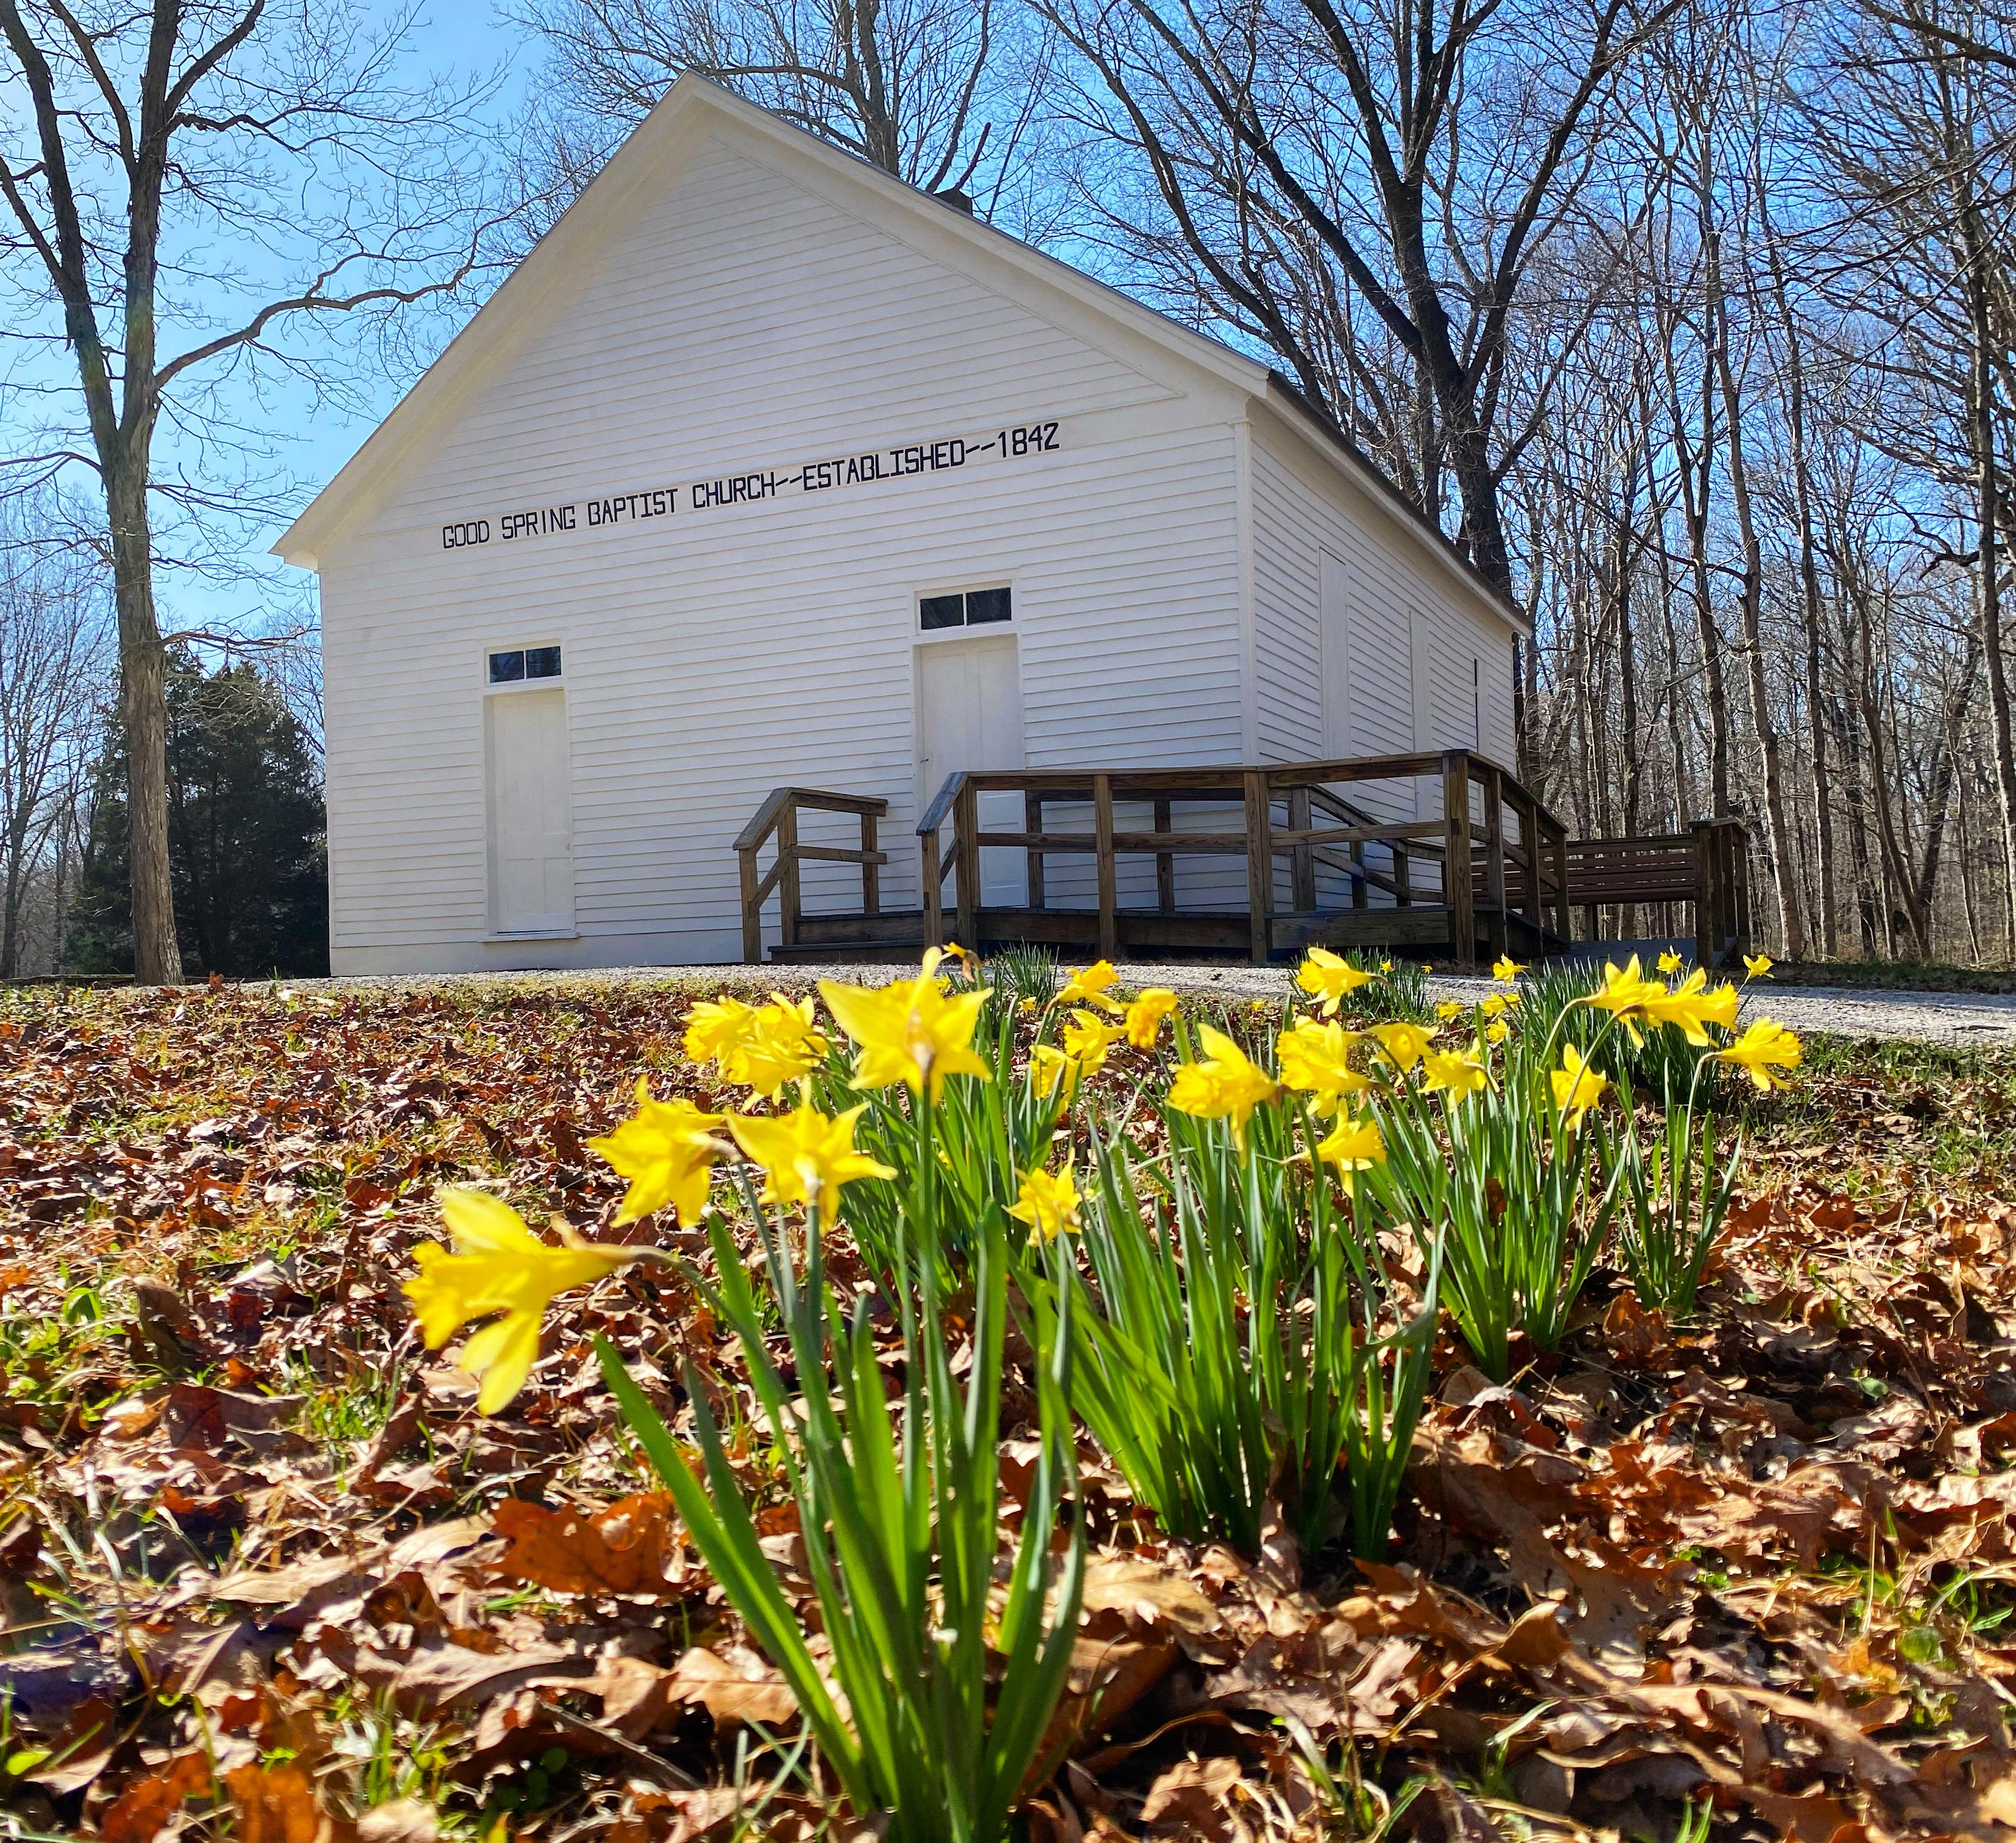 A small white church building with yellow flowers in the foreground.